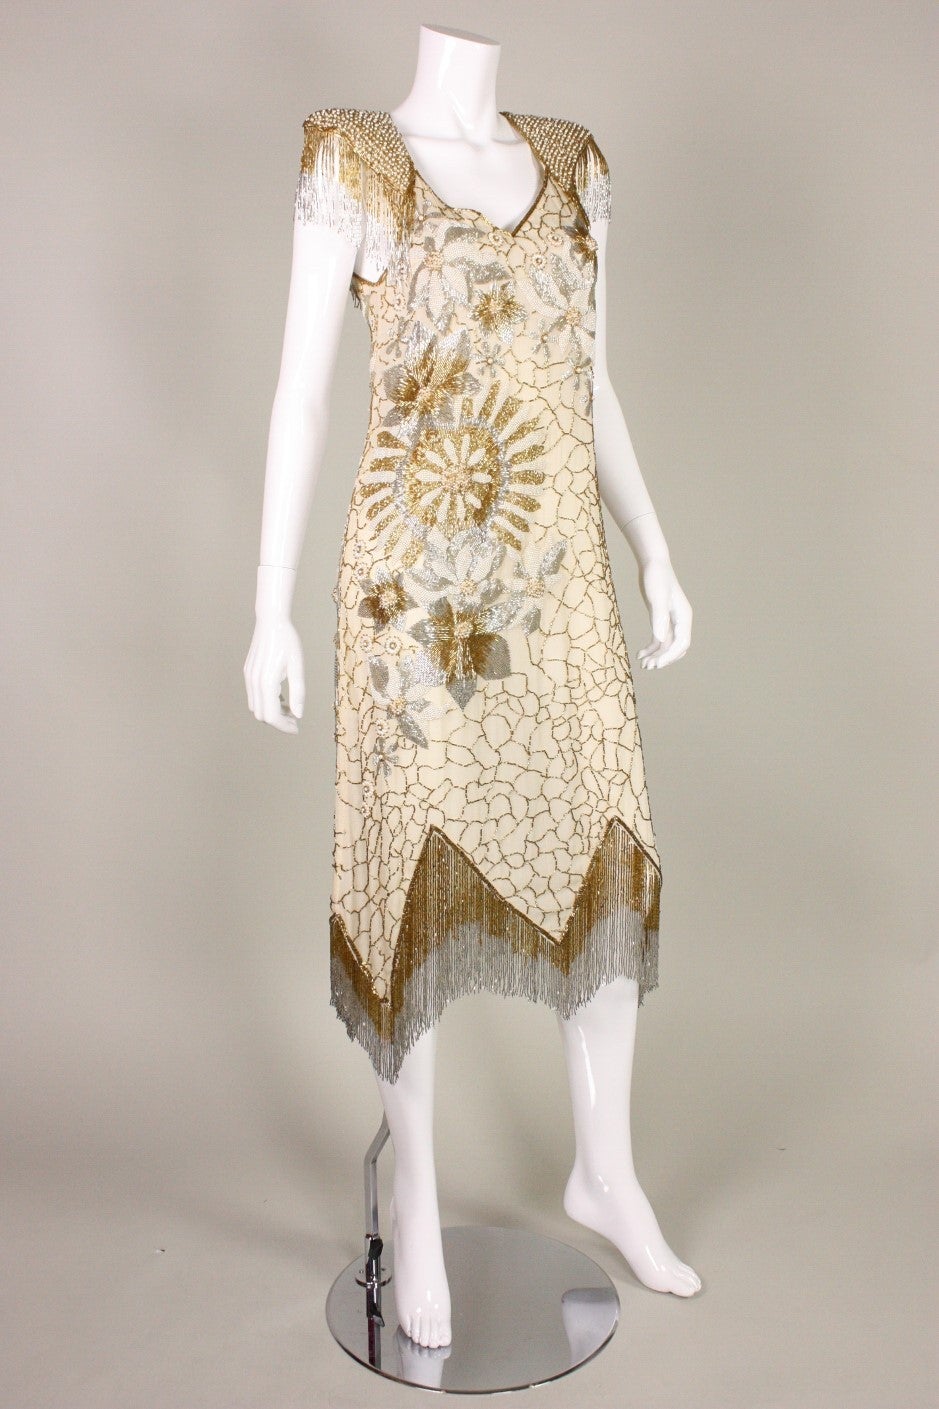 Vintage dress from Los Angeles-based designer Birgitta dates to the 1980's and is made of cream silk chiffon.  It was completely beaded by hand using gold, silver, and pearlized beads.  Beaded fringe at padded shoulders and zigzagged hem.  Center